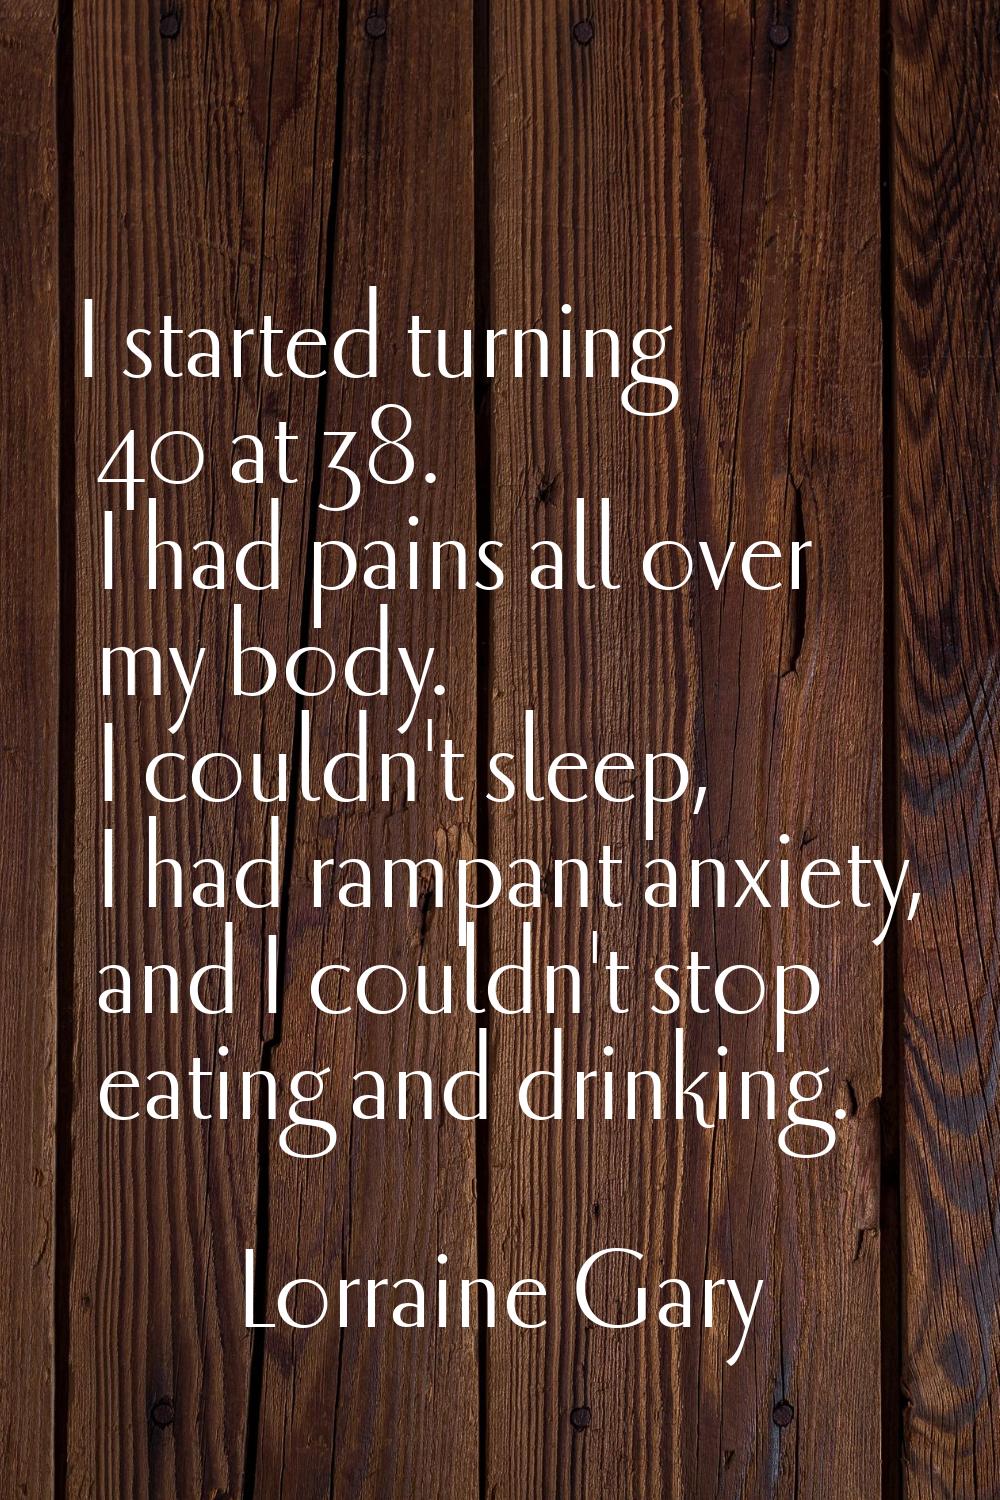 I started turning 40 at 38. I had pains all over my body. I couldn't sleep, I had rampant anxiety, 